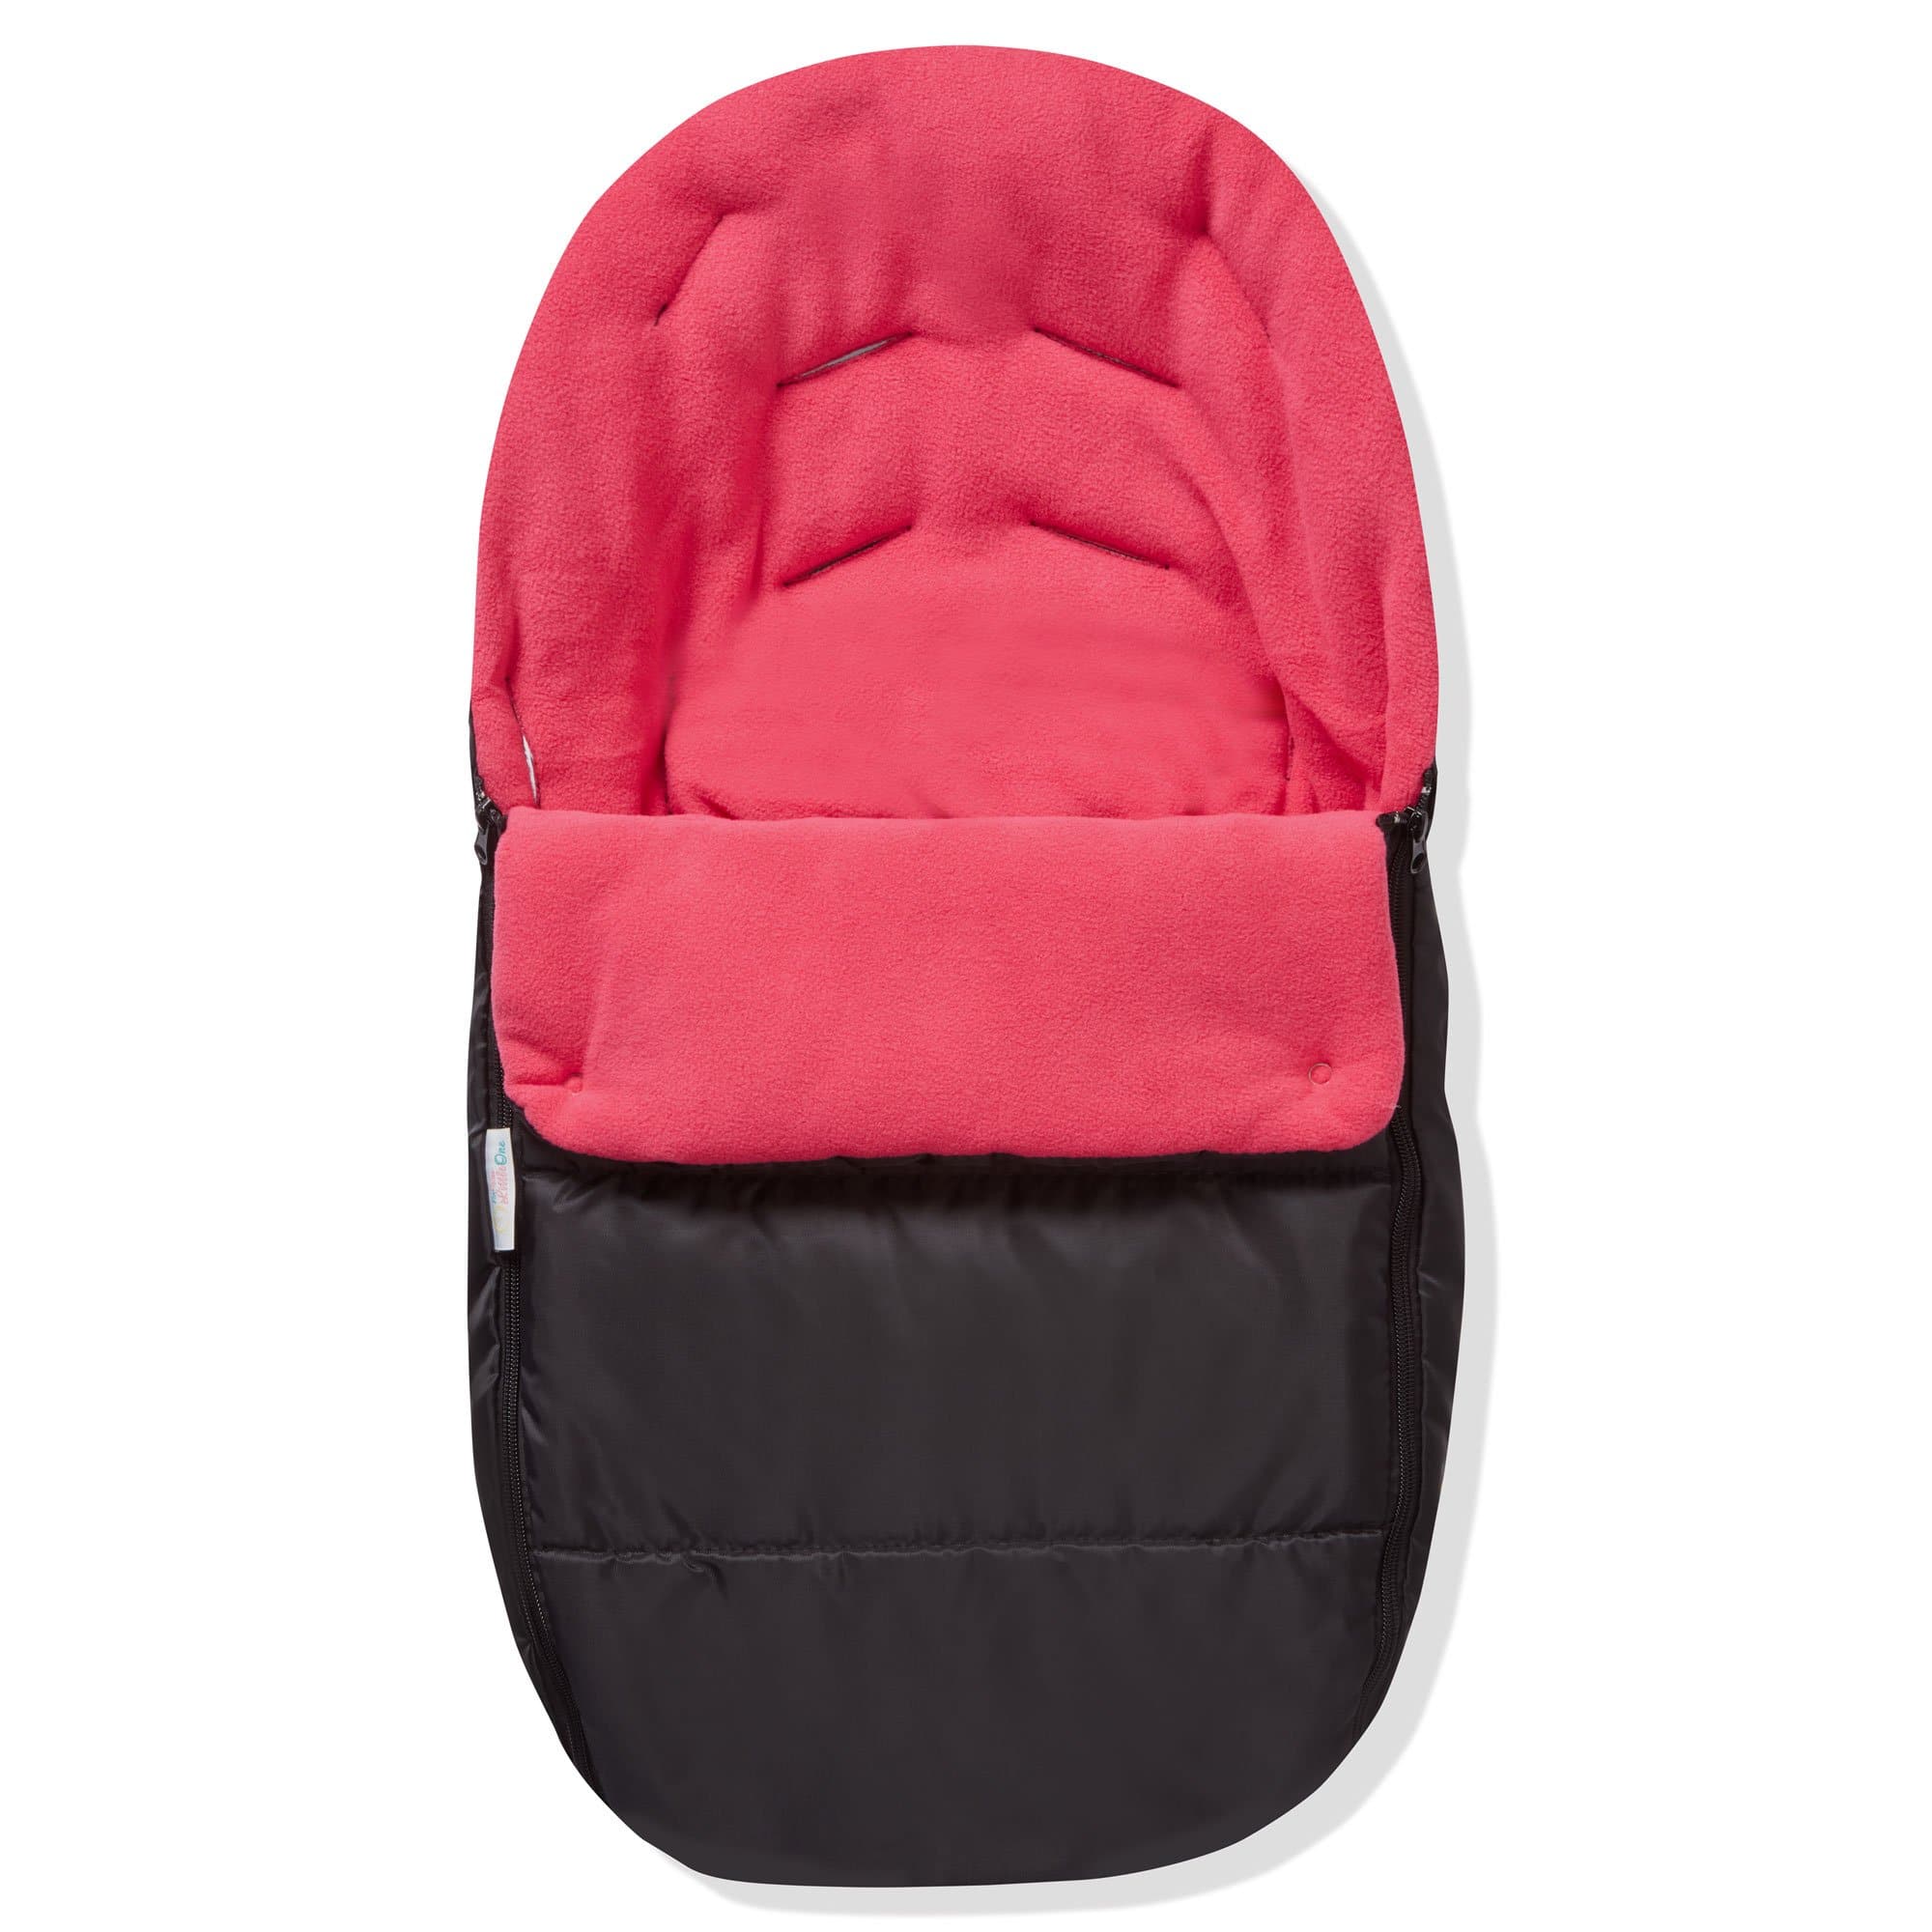 Premium Car Seat Footmuff / Cosy Toes Compatible With Hauck - Pink Rose / Fits All Models | For Your Little One